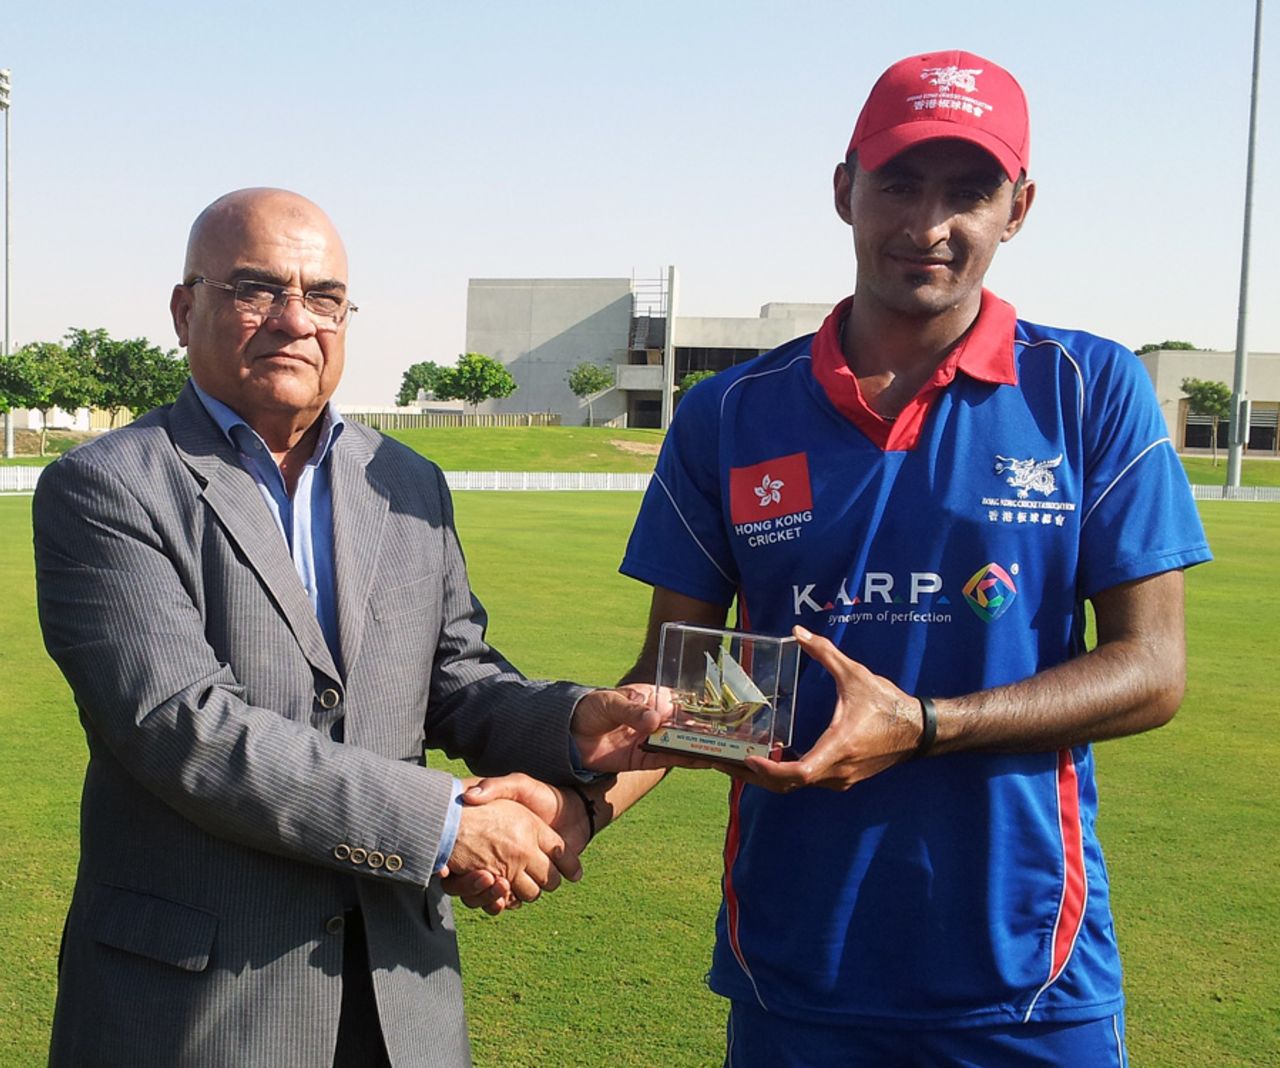 Hong Kong's Nizakat Khan is presented with the Man of the Match award after scoring 65 against Saudi Arabia after their ACC Trophy Elite 2012 Group B match at the ICC Global Cricket Academy, Dubai